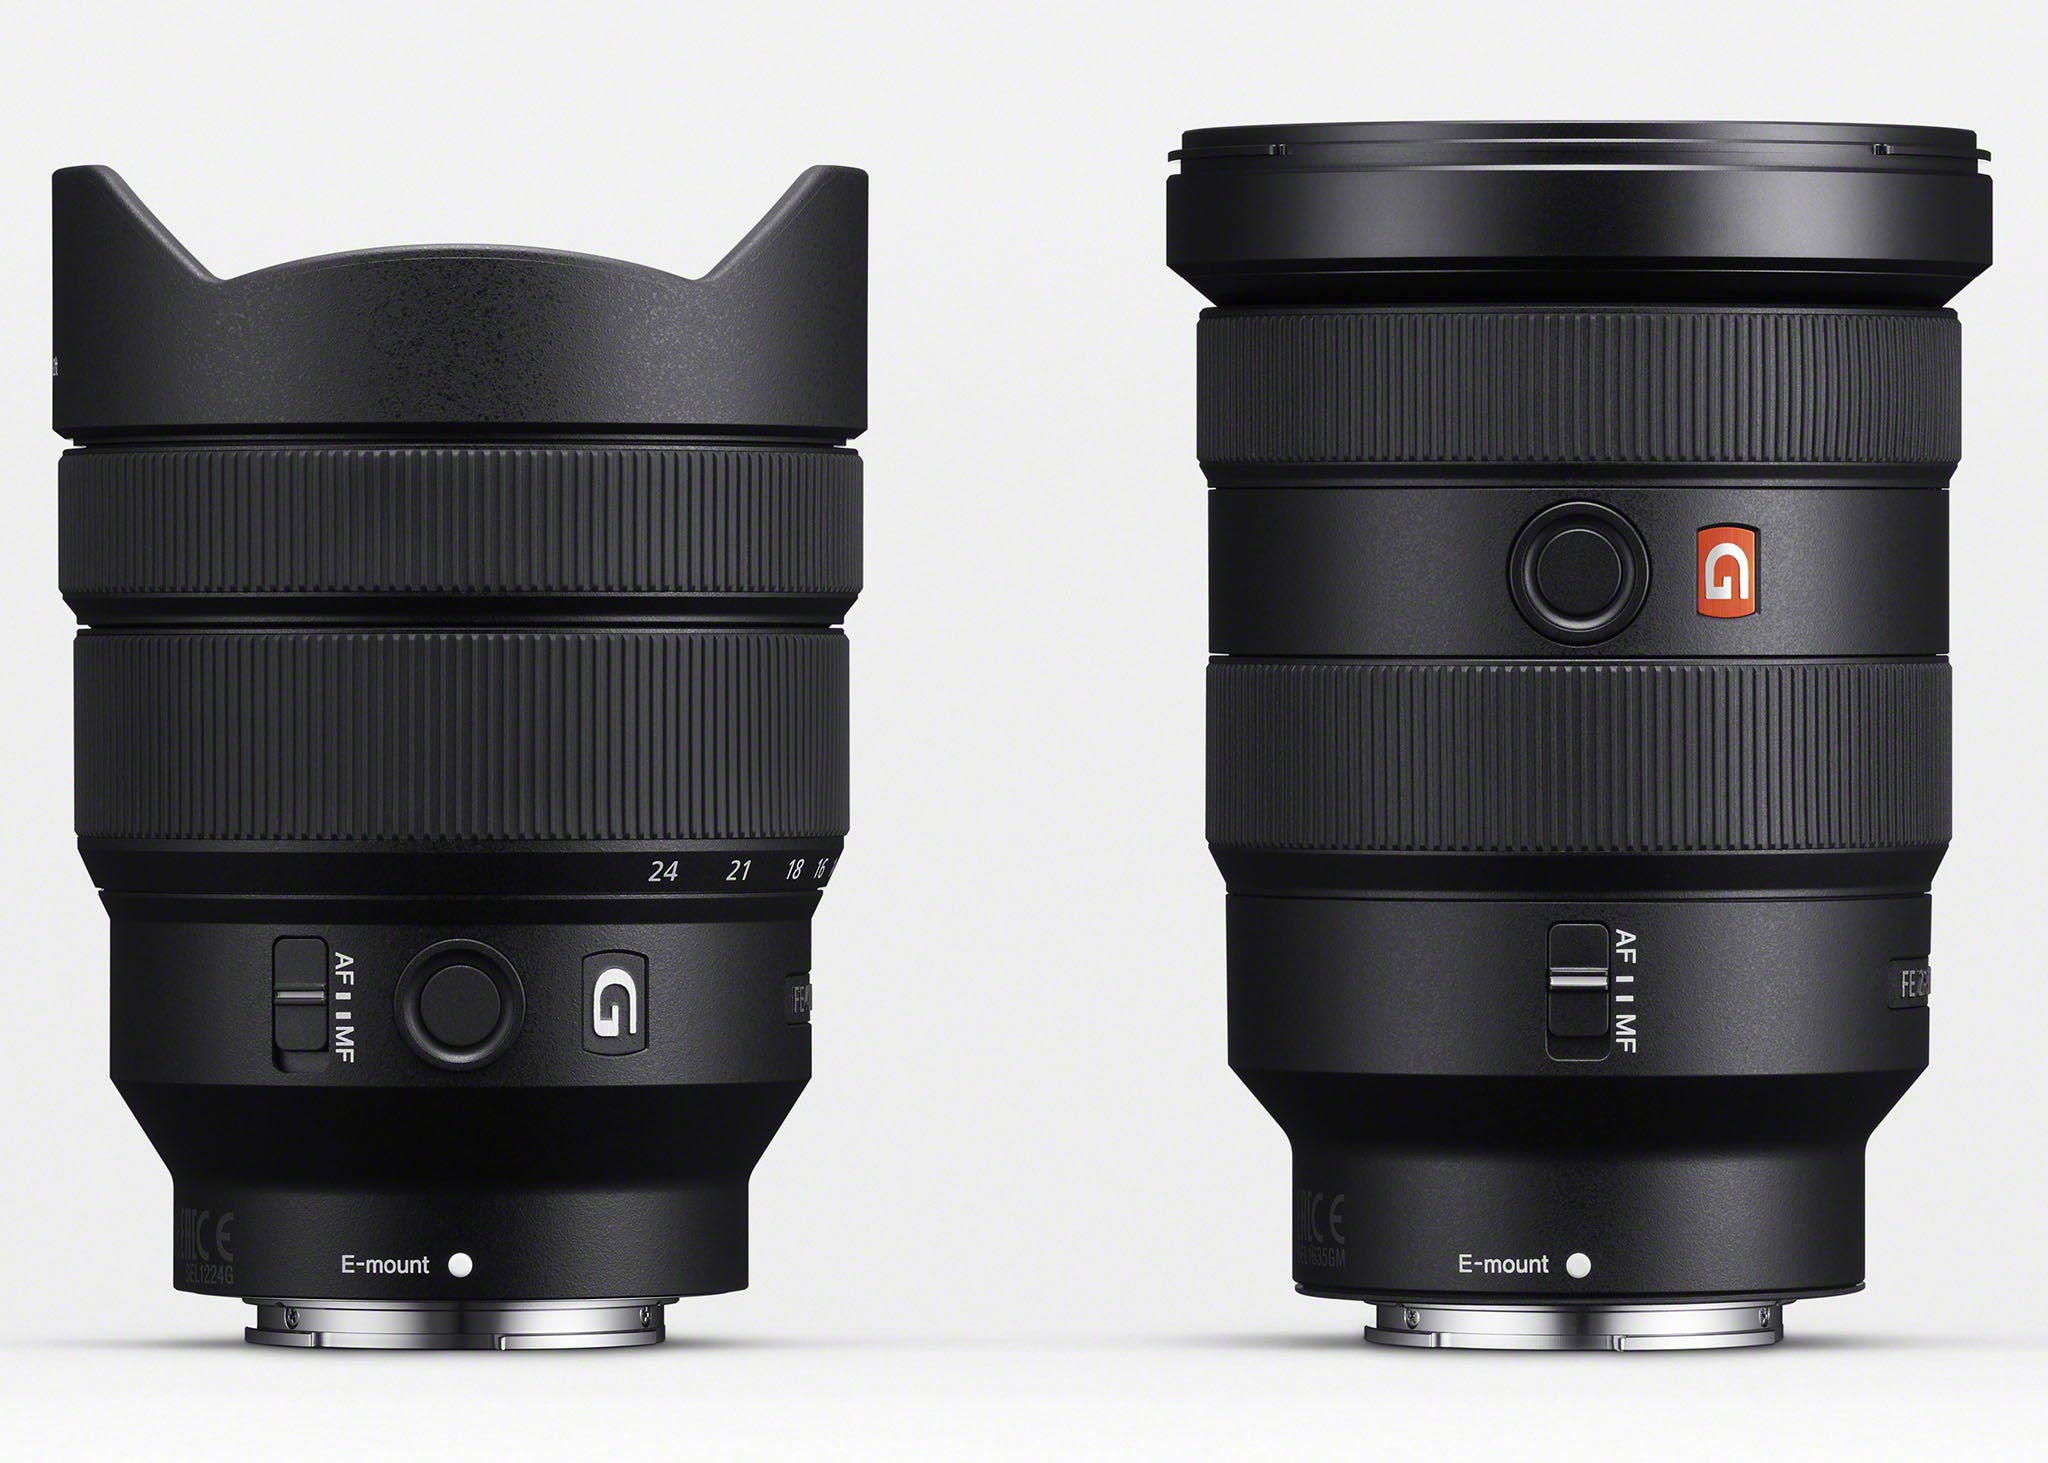 Two fresh perspectives on wide-angle photography just announced by Sony.